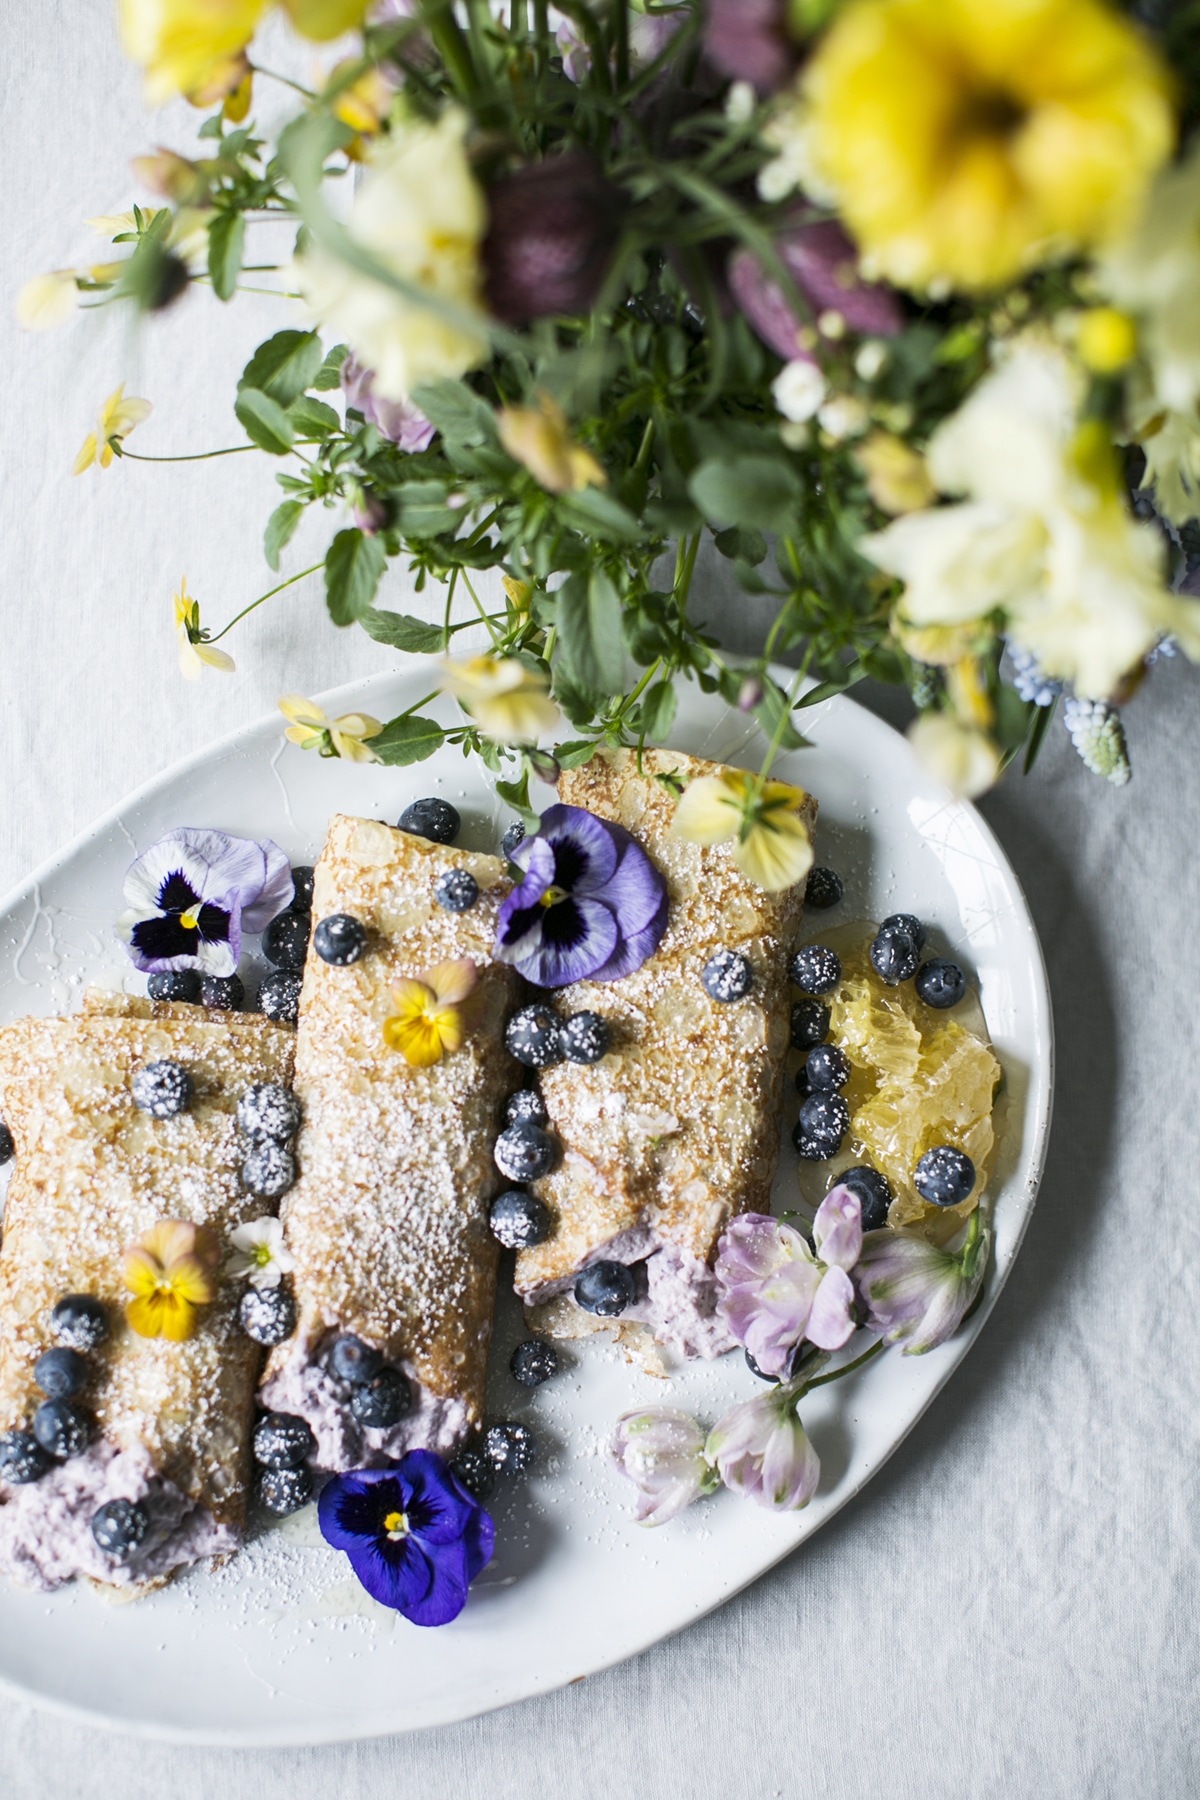 blueberry lemon ricotta crepes with edible flowers | easter brunch menu ideas on coco kelley